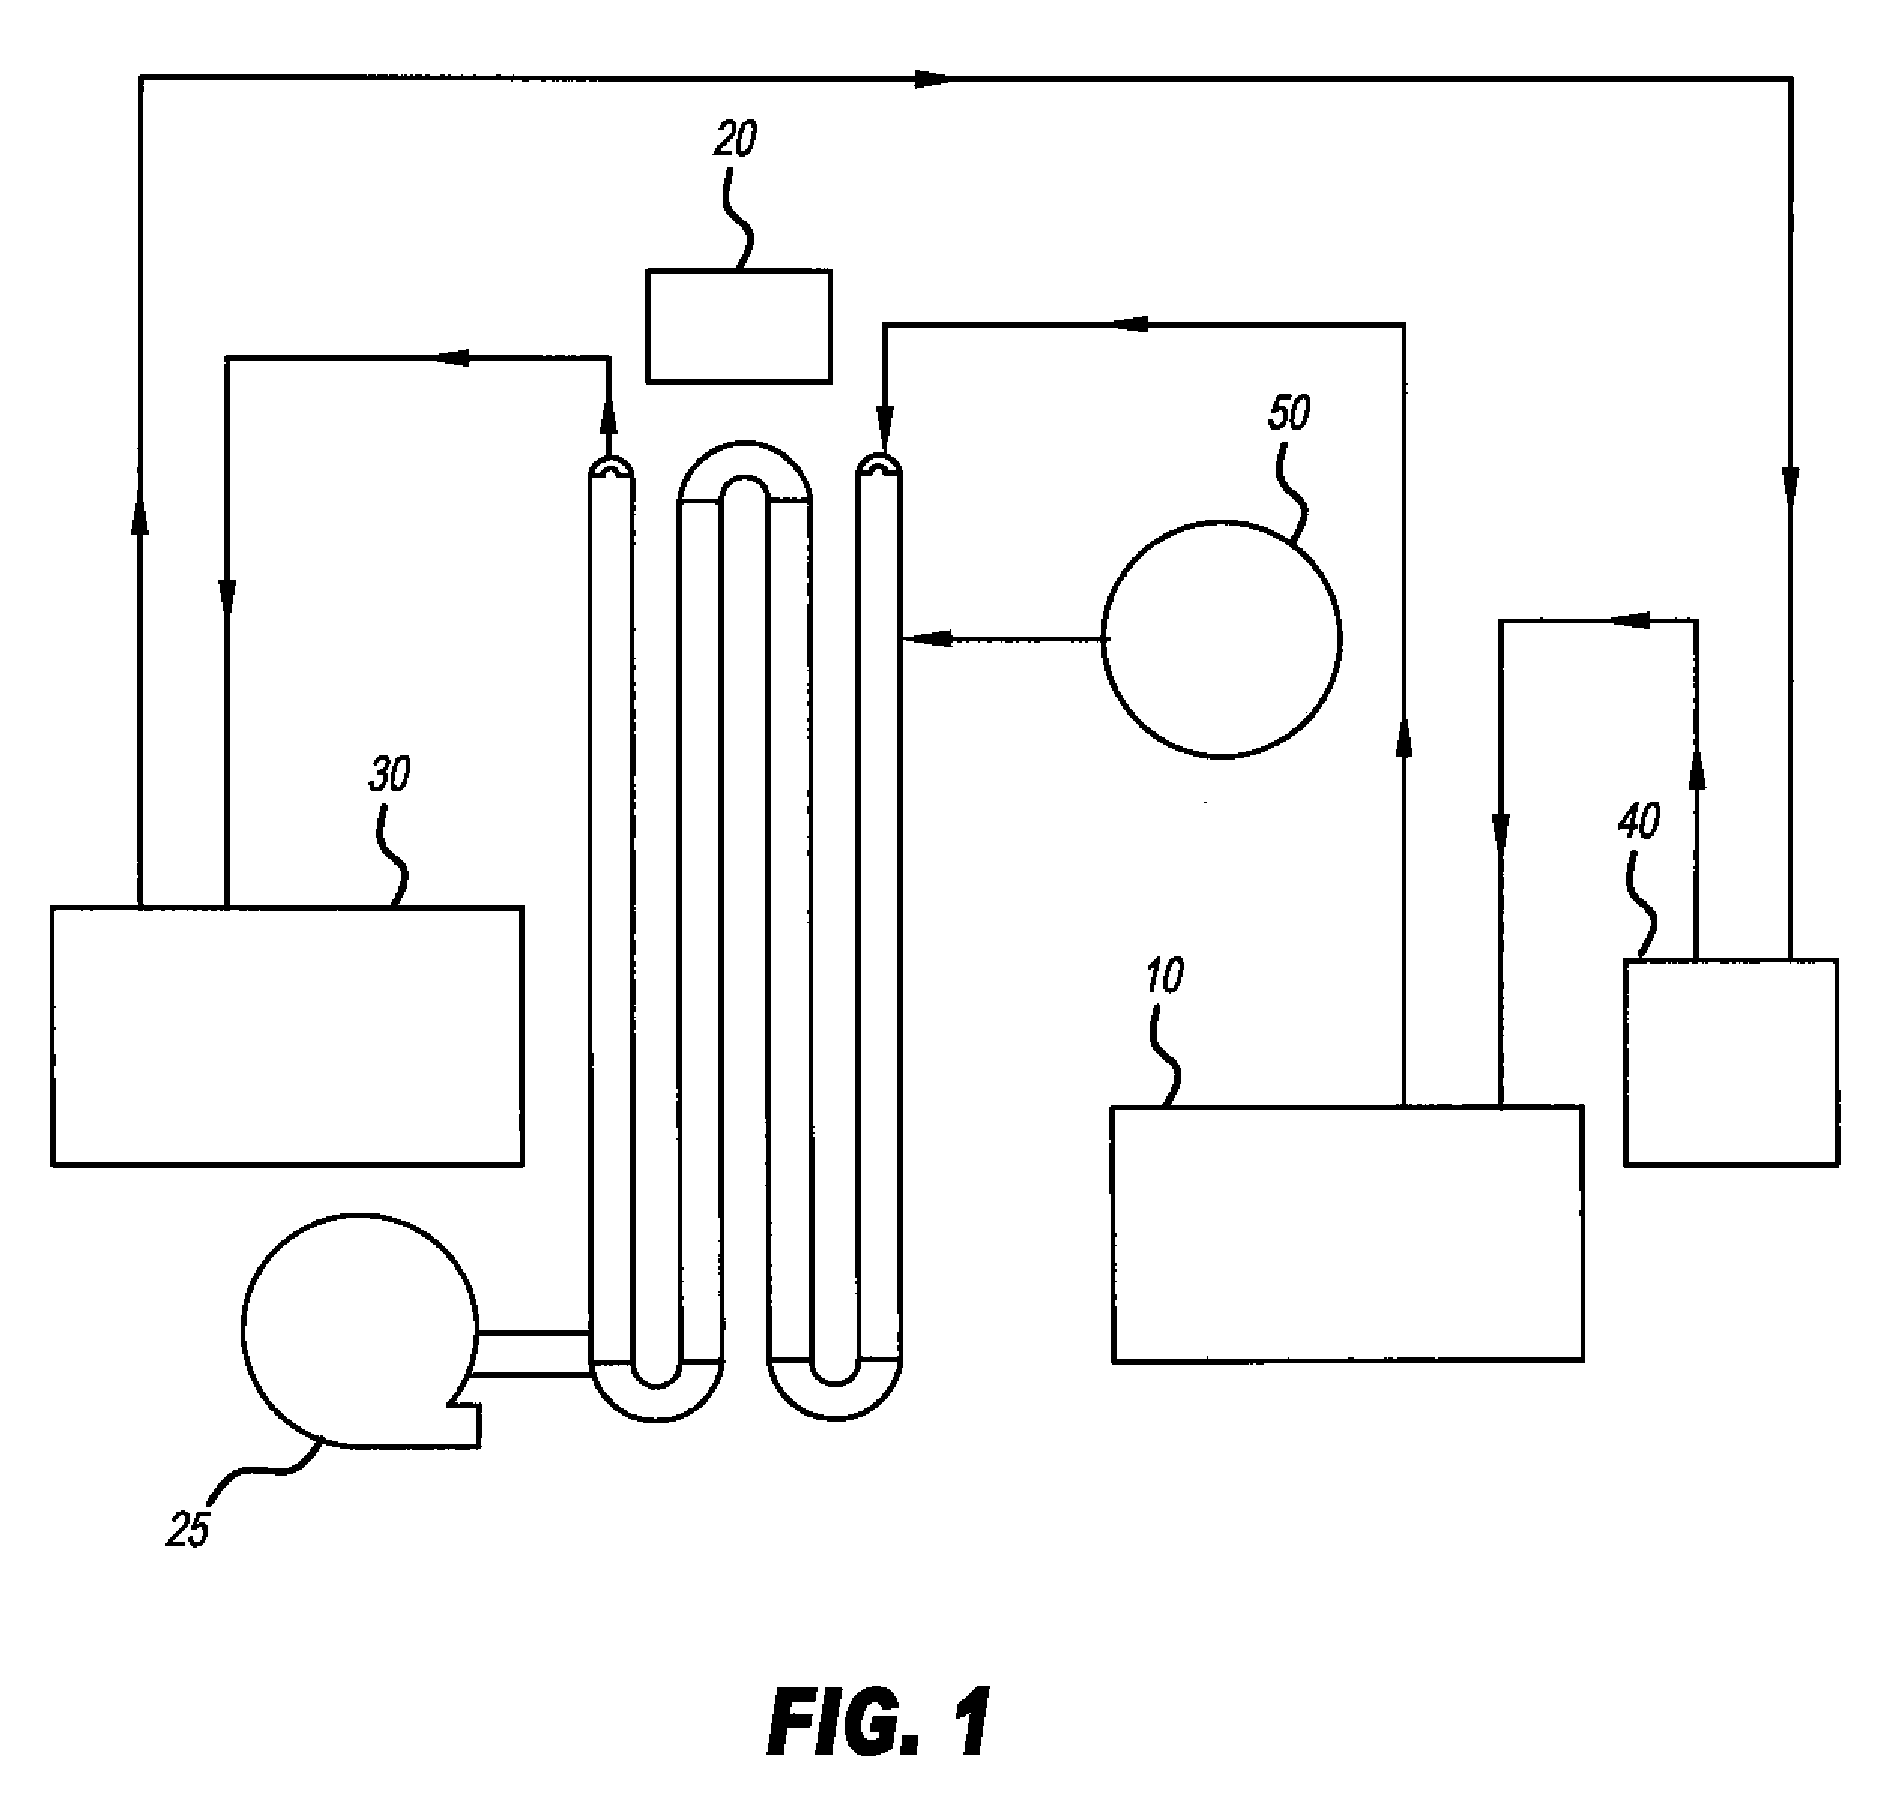 Polymer-containing solvent purifying process